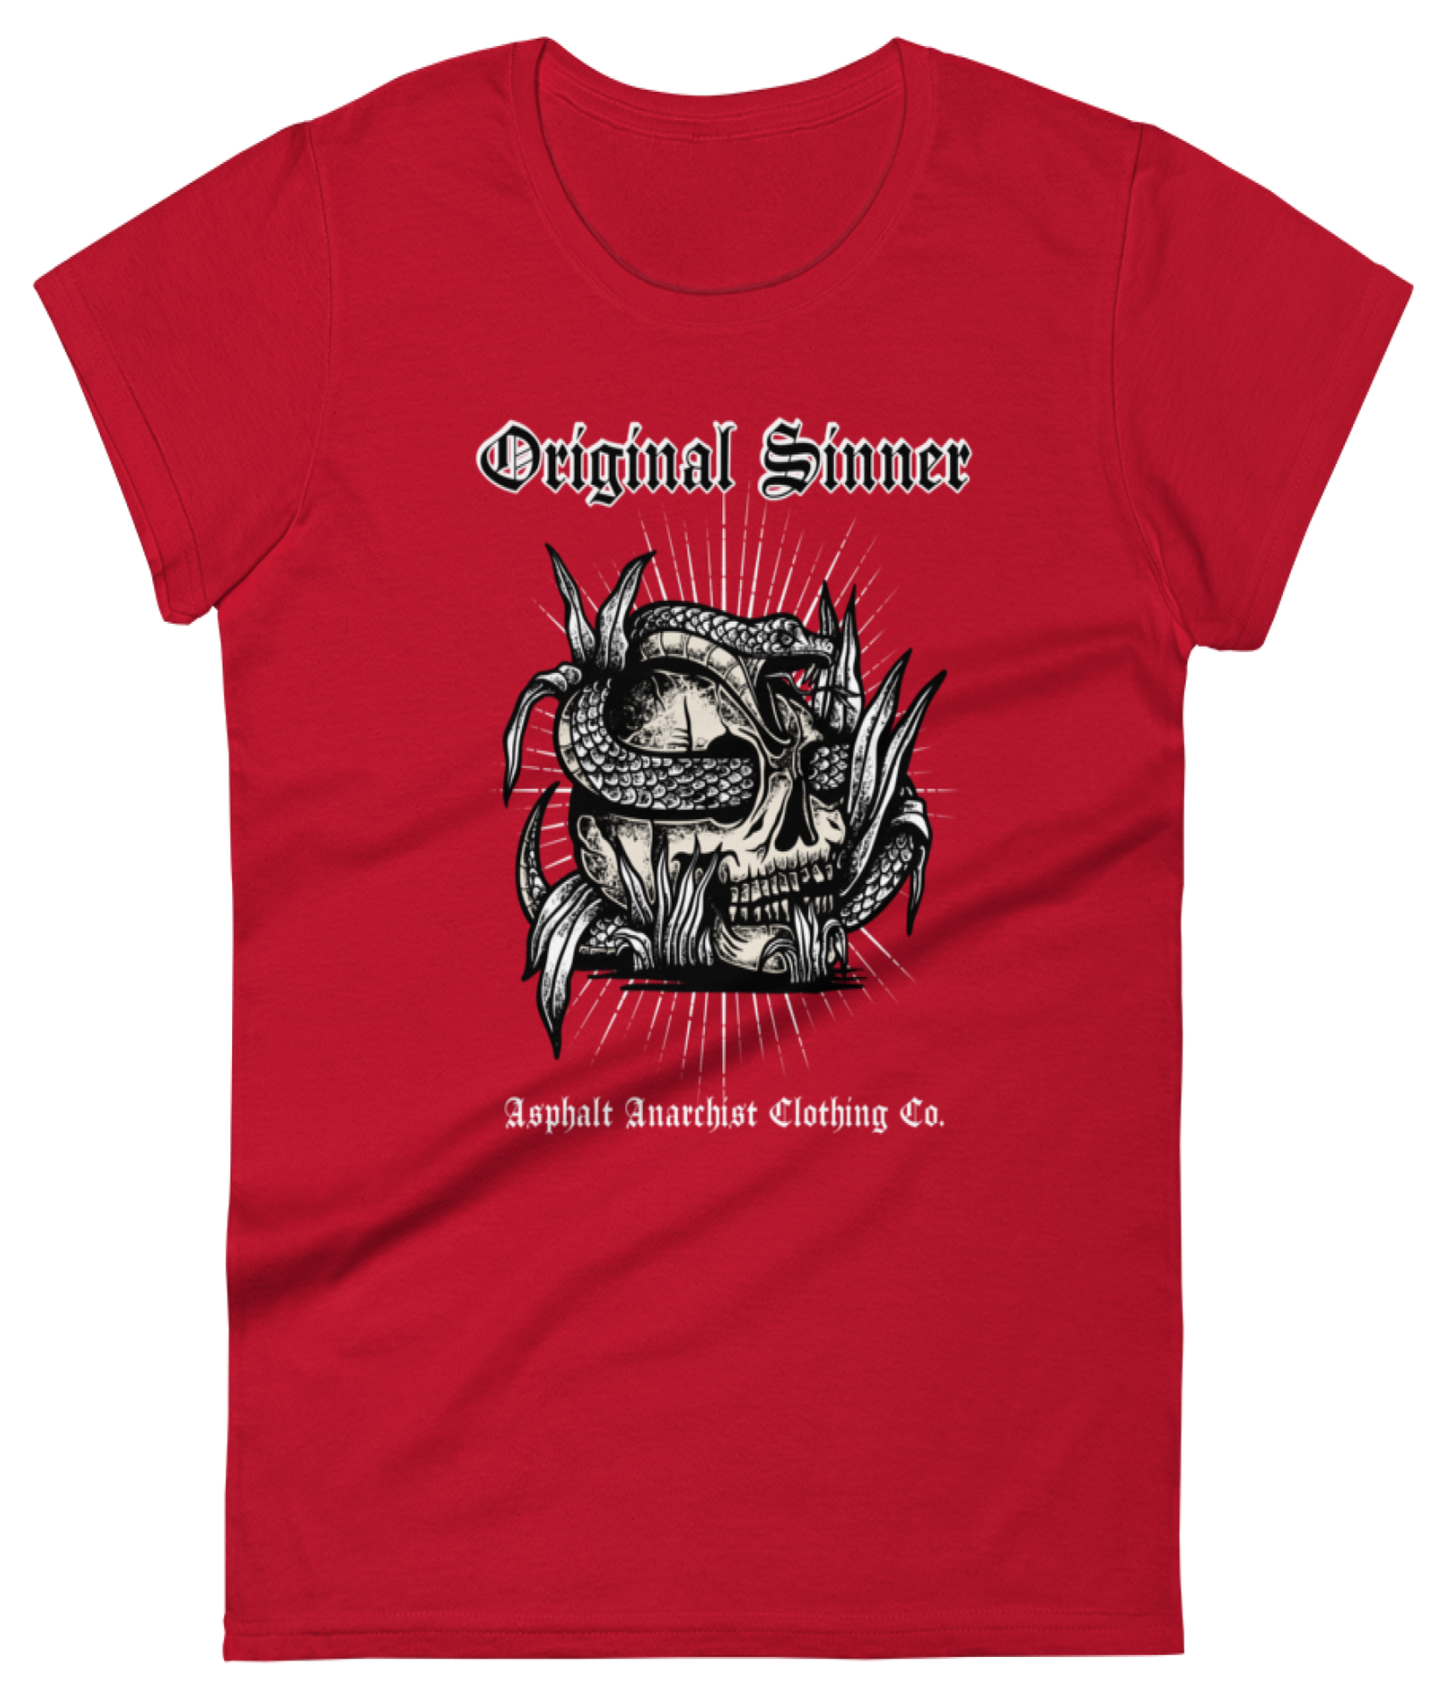 The Original Sinner Women's Tee Rockabilly Pin Up From Asphalt Anarchist Clothing Co. HOT ROD KUSTOM KULTURE APPAREL & PRODUCTS